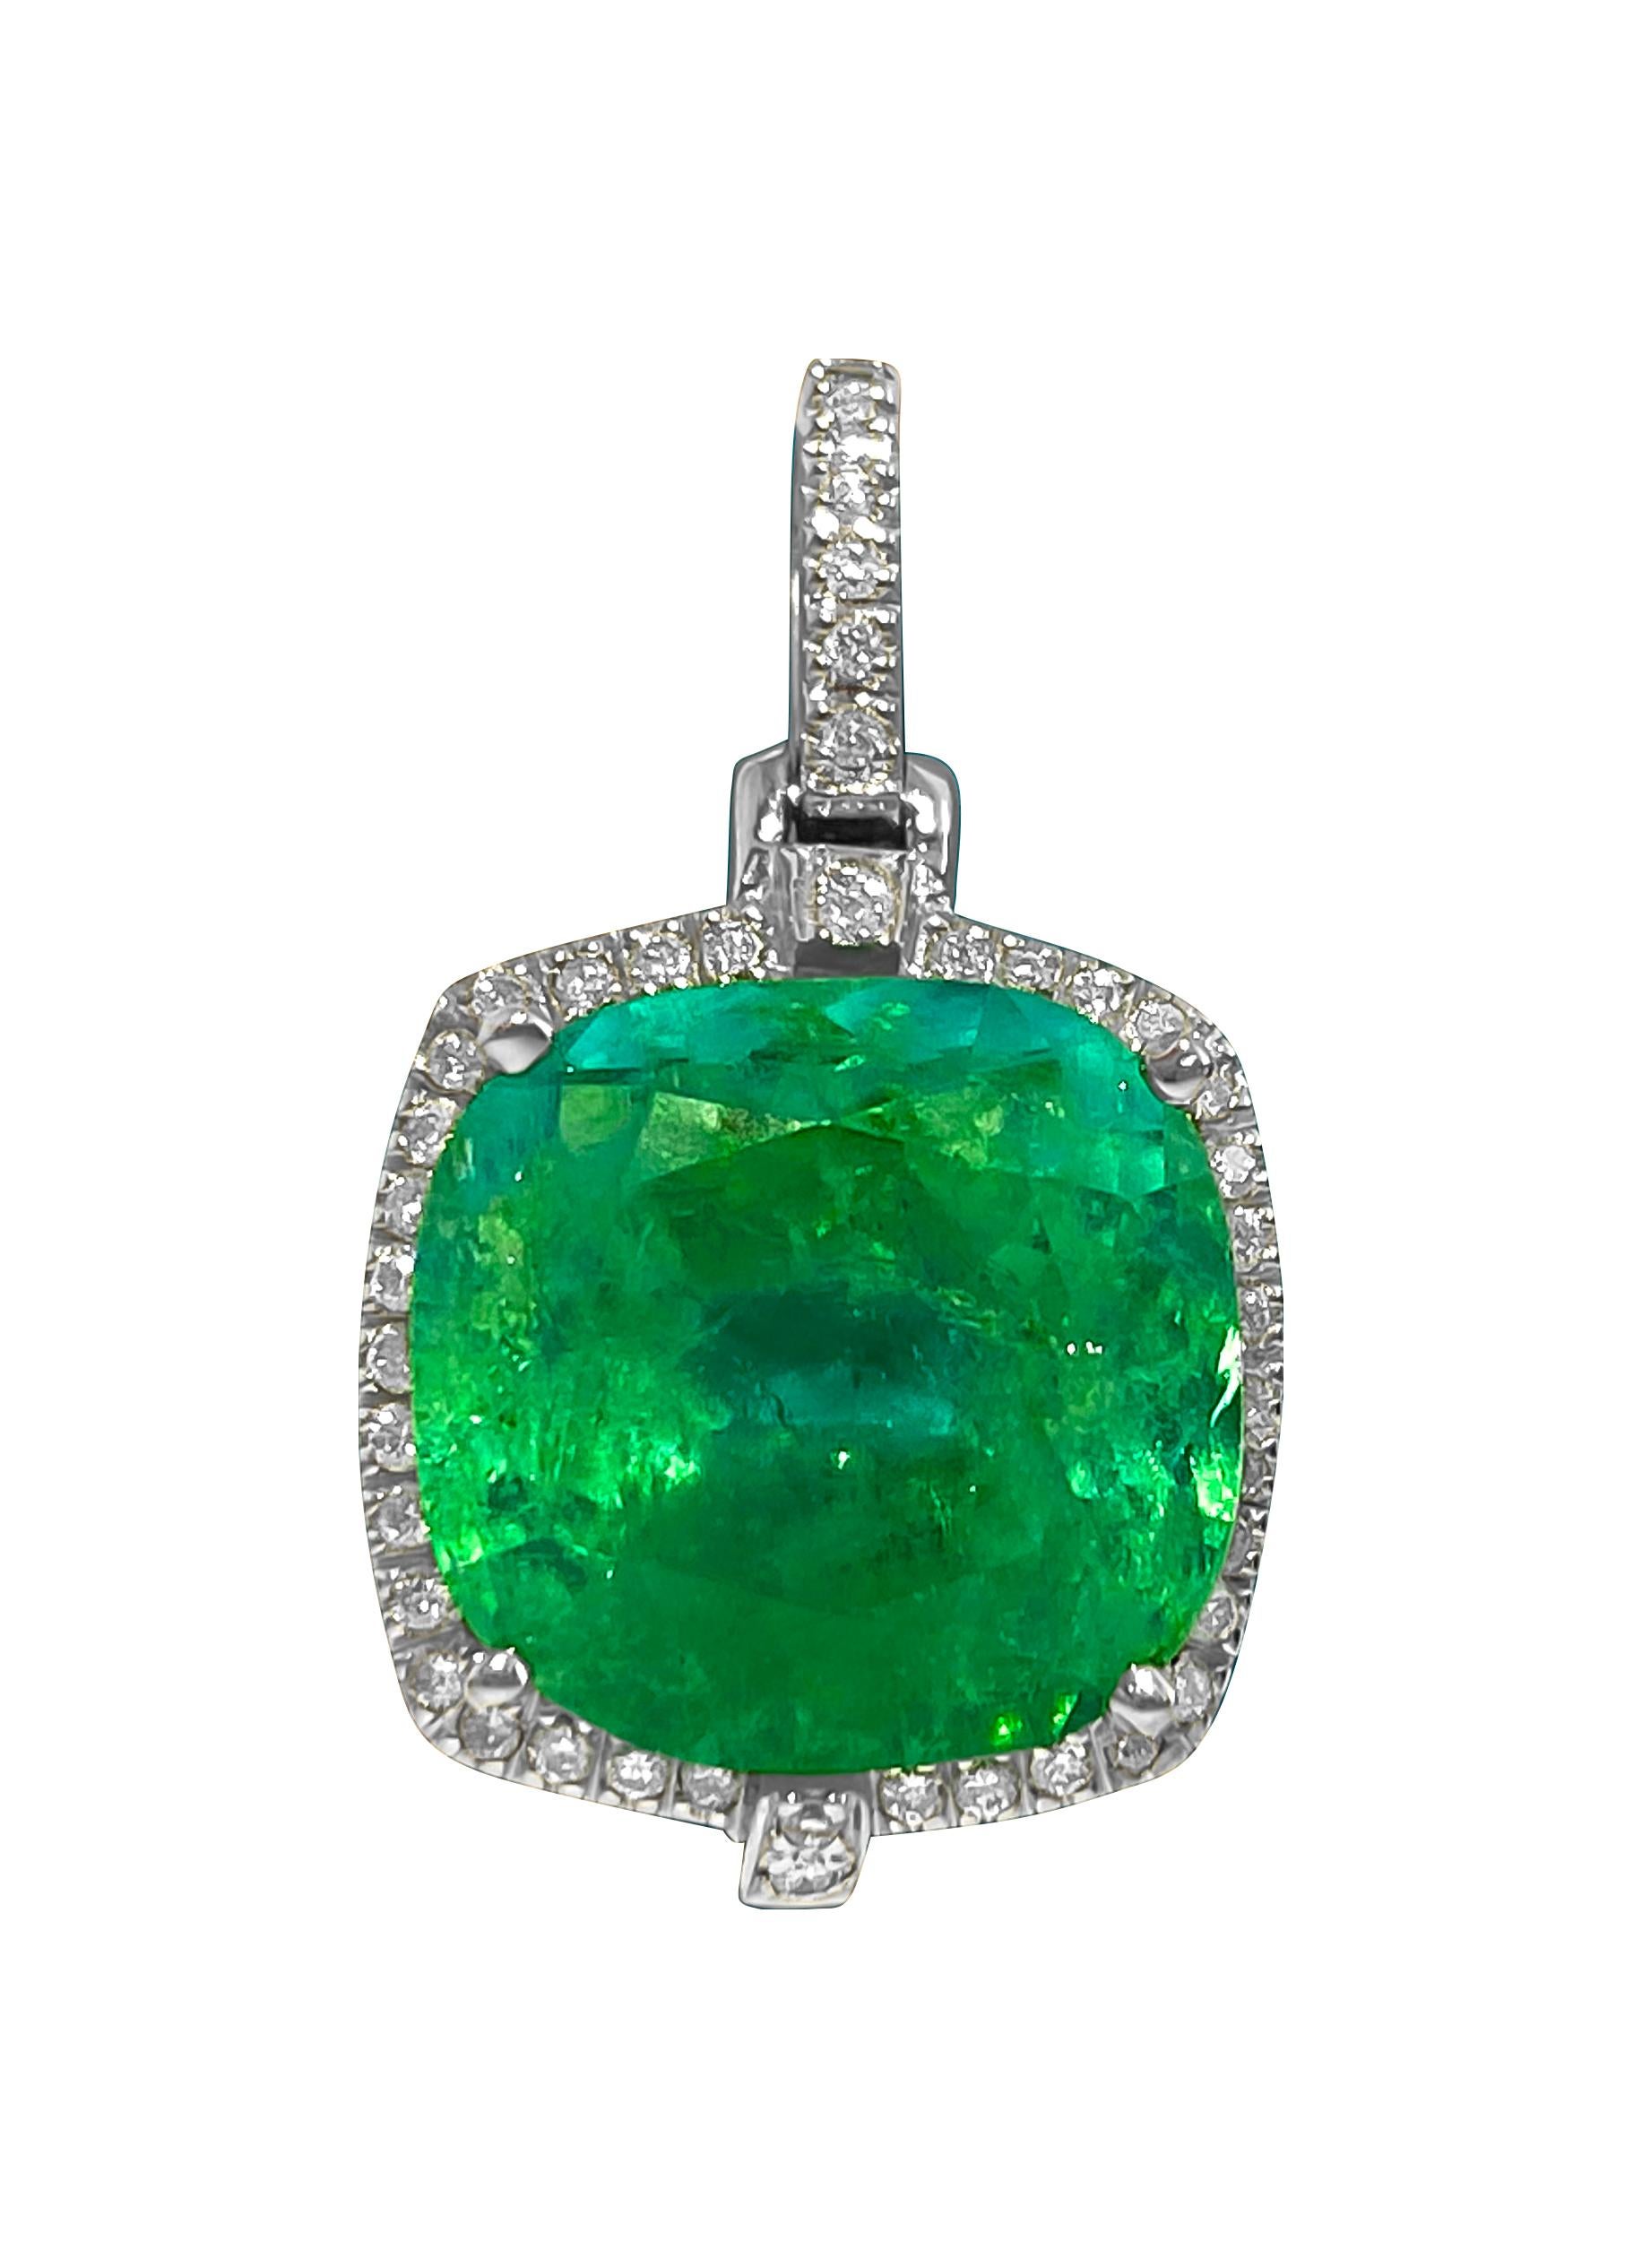 Adorn yourself with luxury wearing this stunning necklace crafted from 14K white gold, featuring a rare 8.90 carat Colombian emerald and 0.75 carats of round brilliant-cut diamonds with VS clarity and G color. Each stone, including the emerald, is